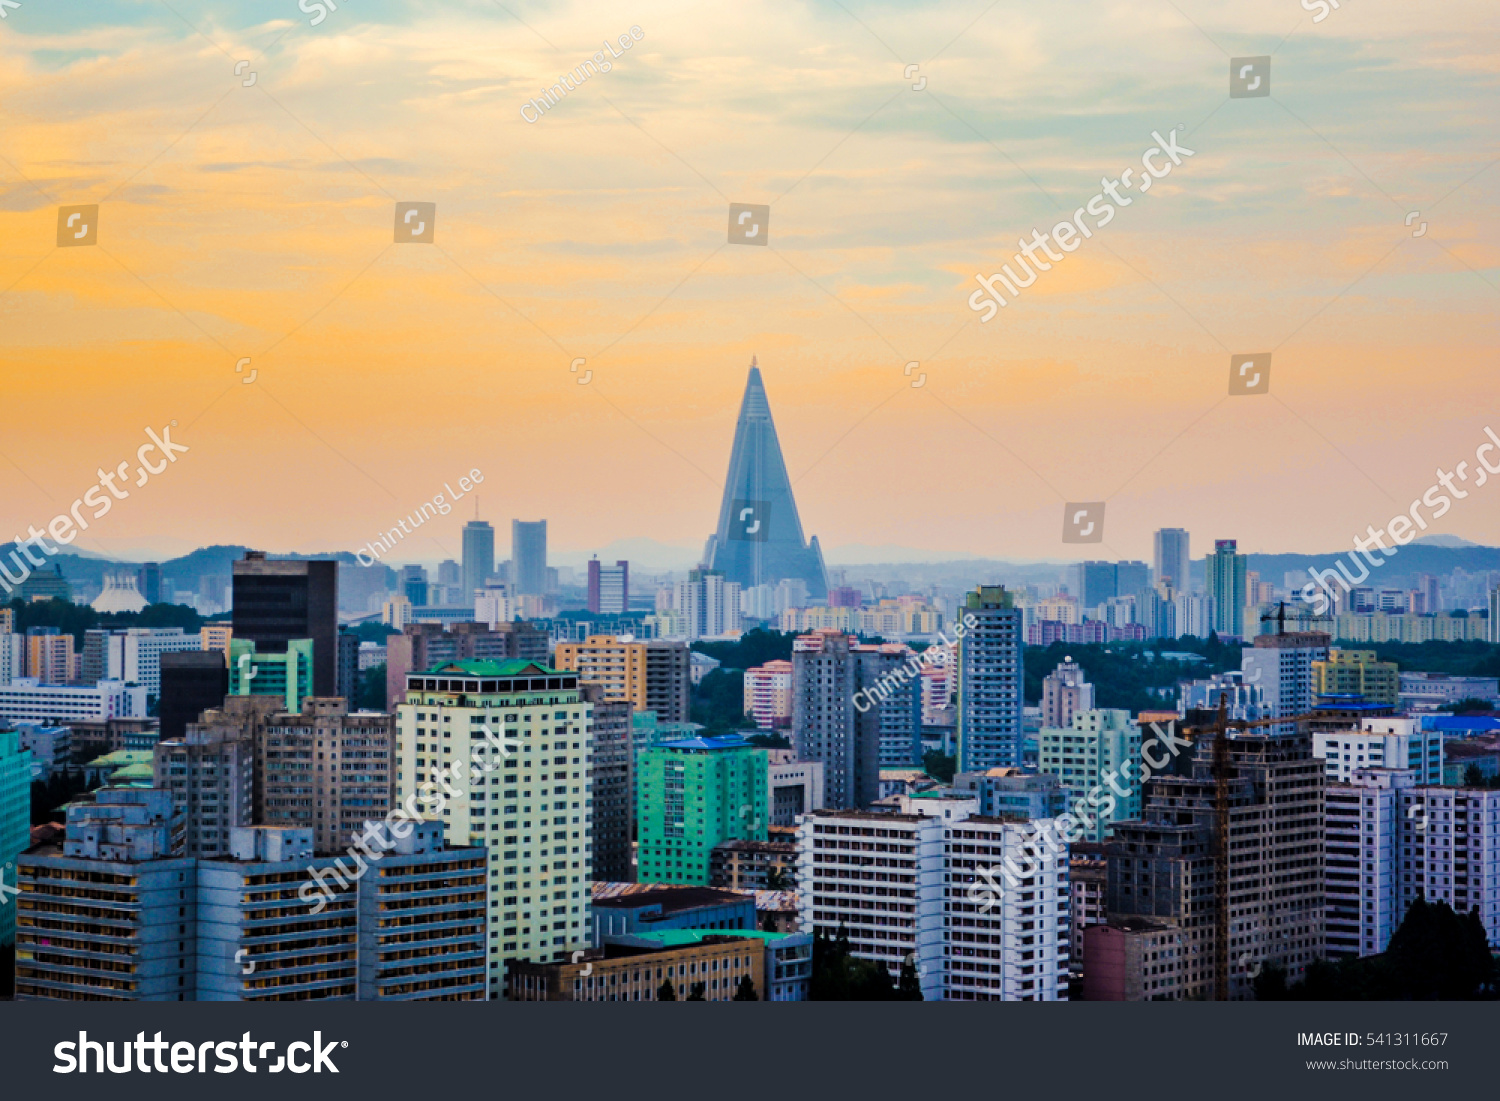 The skyline view of Ryugyong Hotel, an unfinished 105-story pyramid-shaped skyscraper & the first tall building in Pyongyang city, the capital of North Korea (DPRK) #541311667